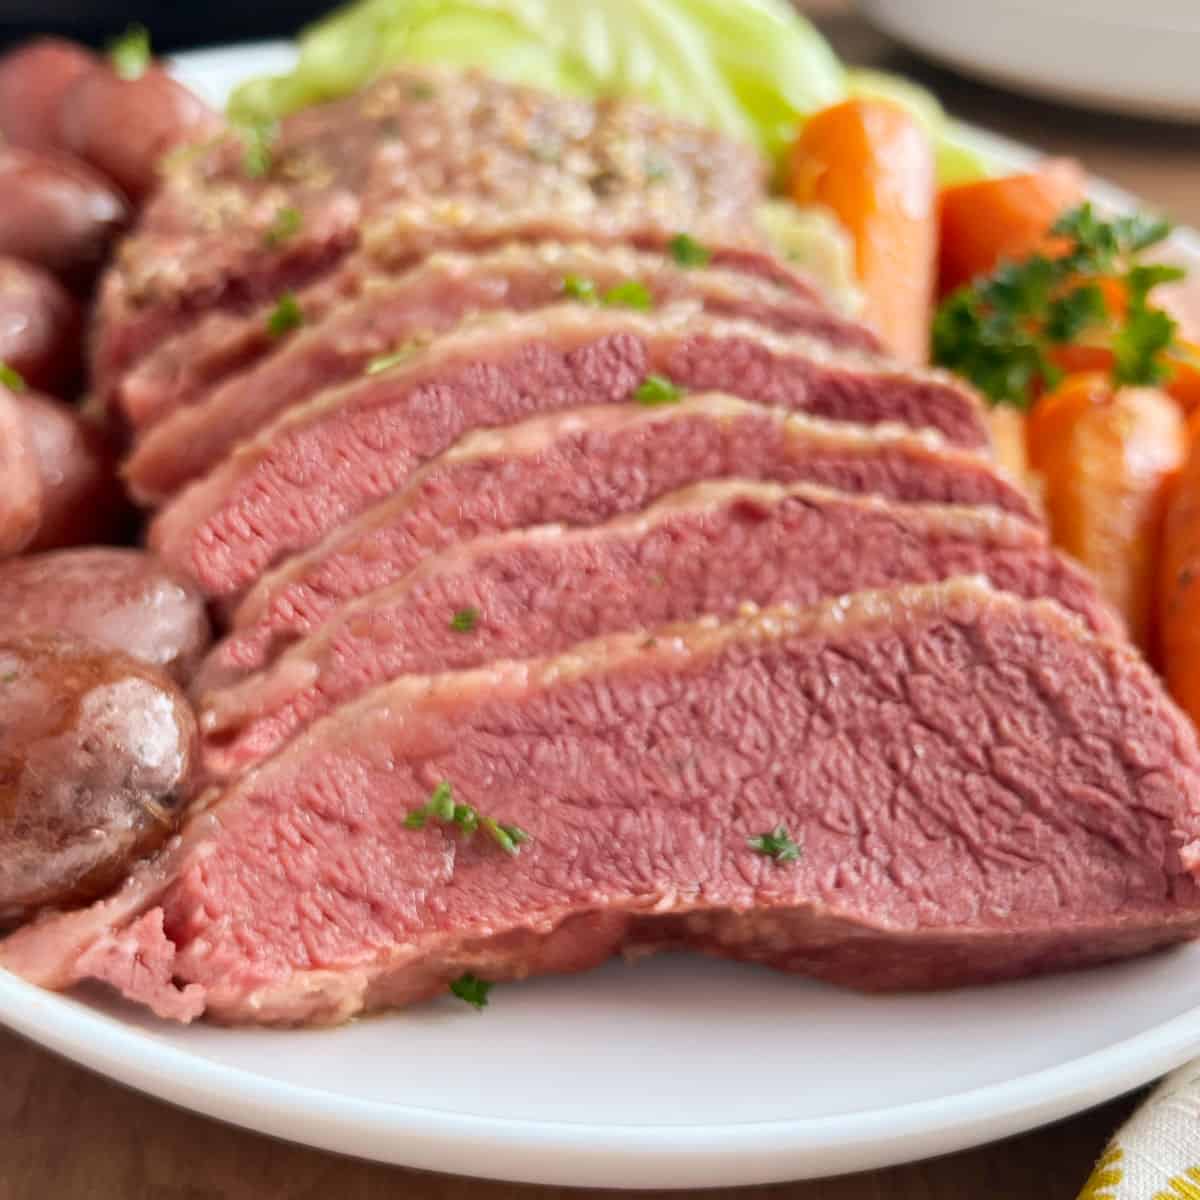 sliced crock pot corned beef with cabbage, carrots and potatoes on platter,